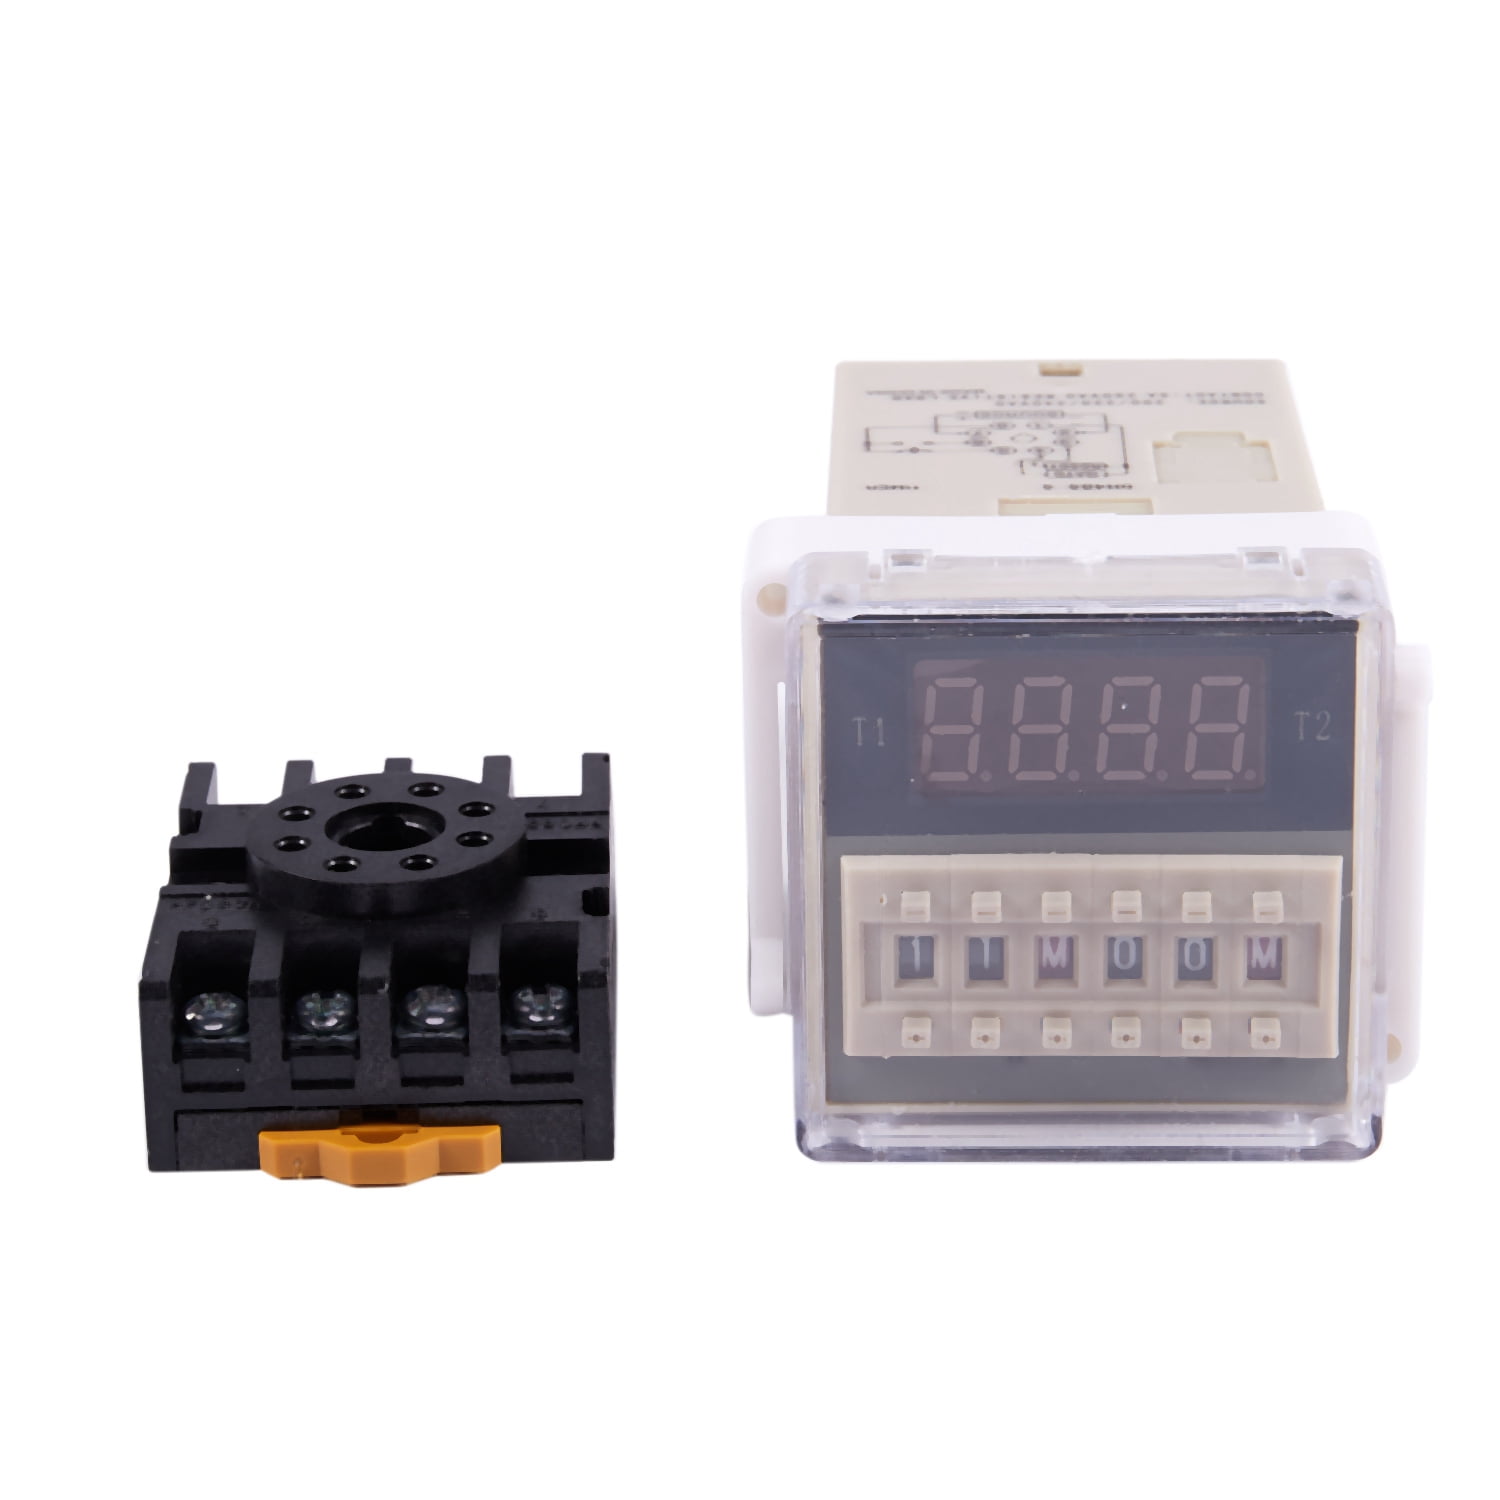 AC 220 V dh48s-s Digital PRECISION PROGRAMMABLE TIME DELAY Relay with Socket 